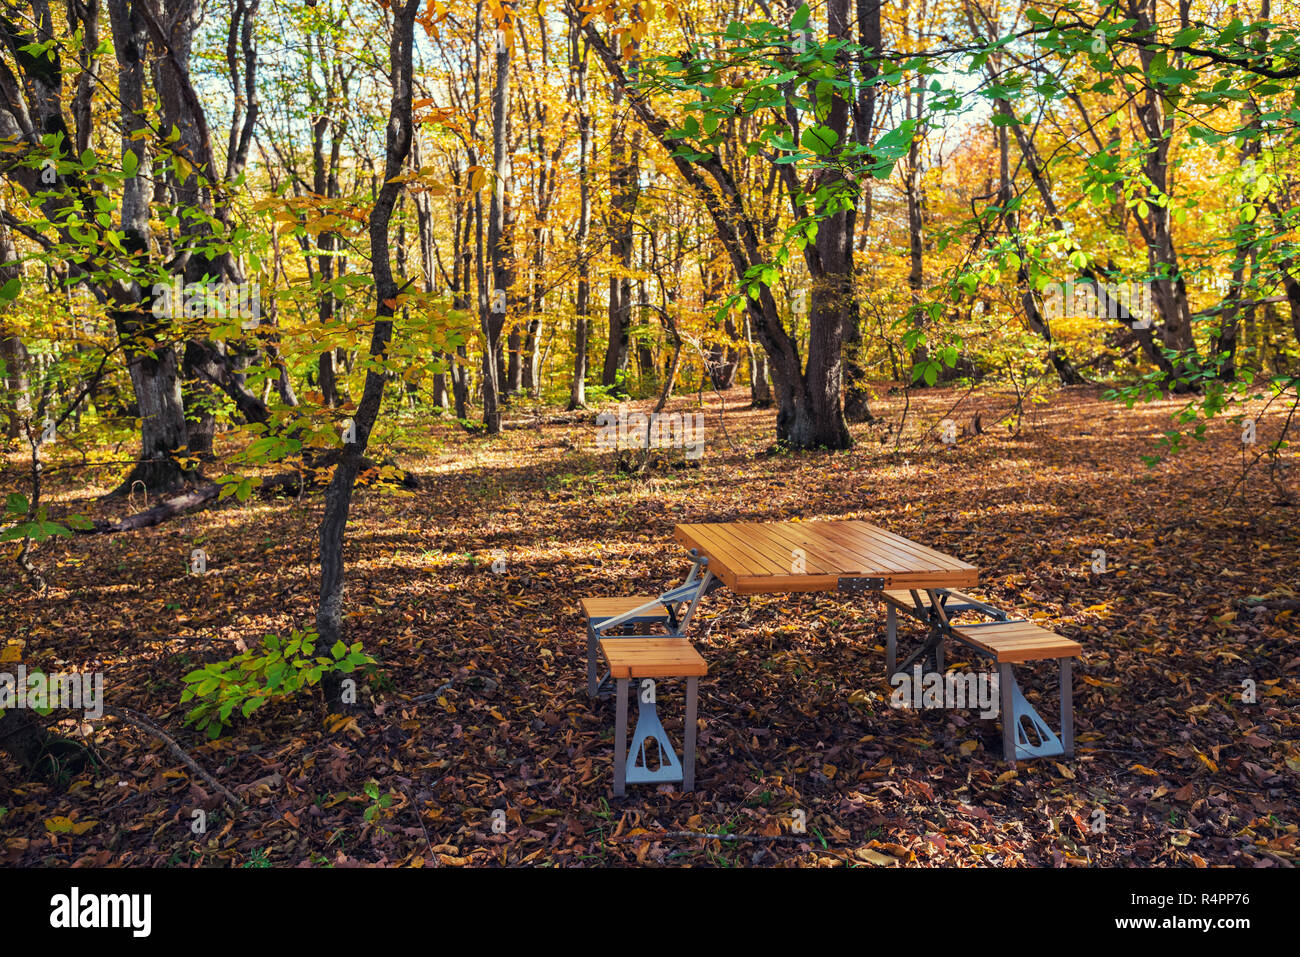 Folding picnic table in the autumn forest Stock Photo